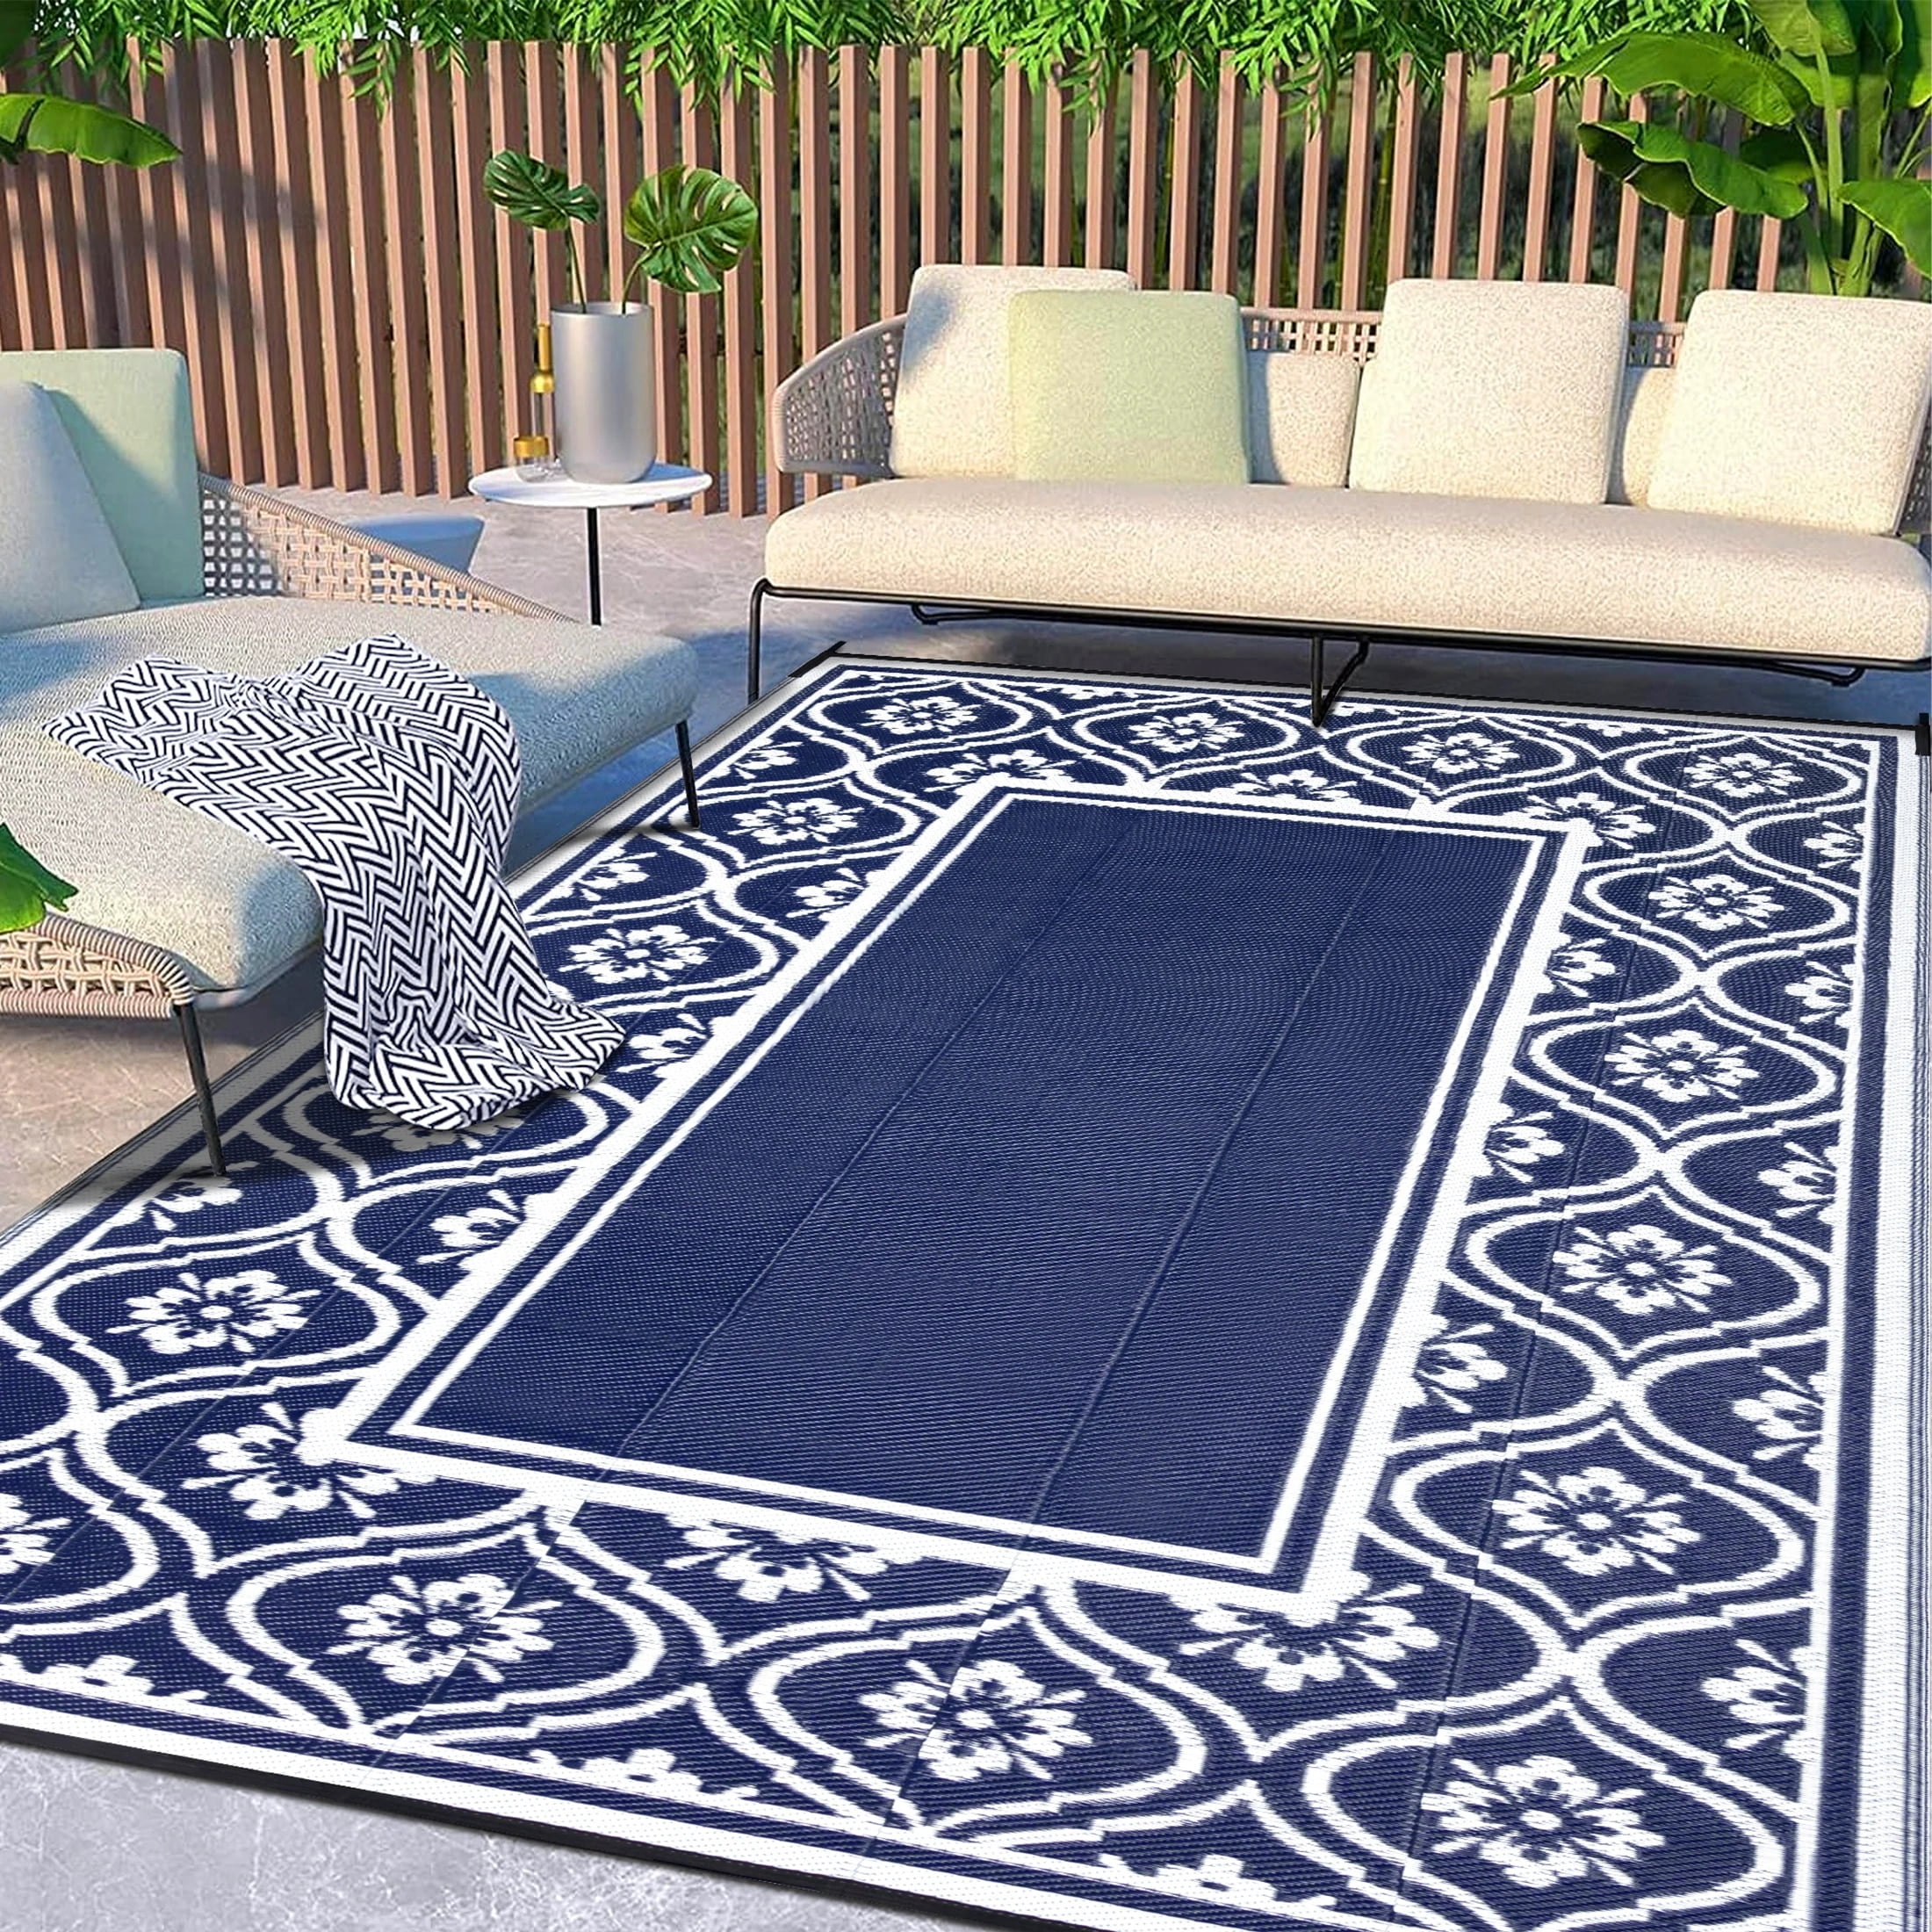 LEEVAN Black and White Outdoor Rug 4x6, Cotton Washable Outdoor Patio Rug,  Black Striped Reversible Rug for Balcony Decor, Woven Durable Entryway Rug